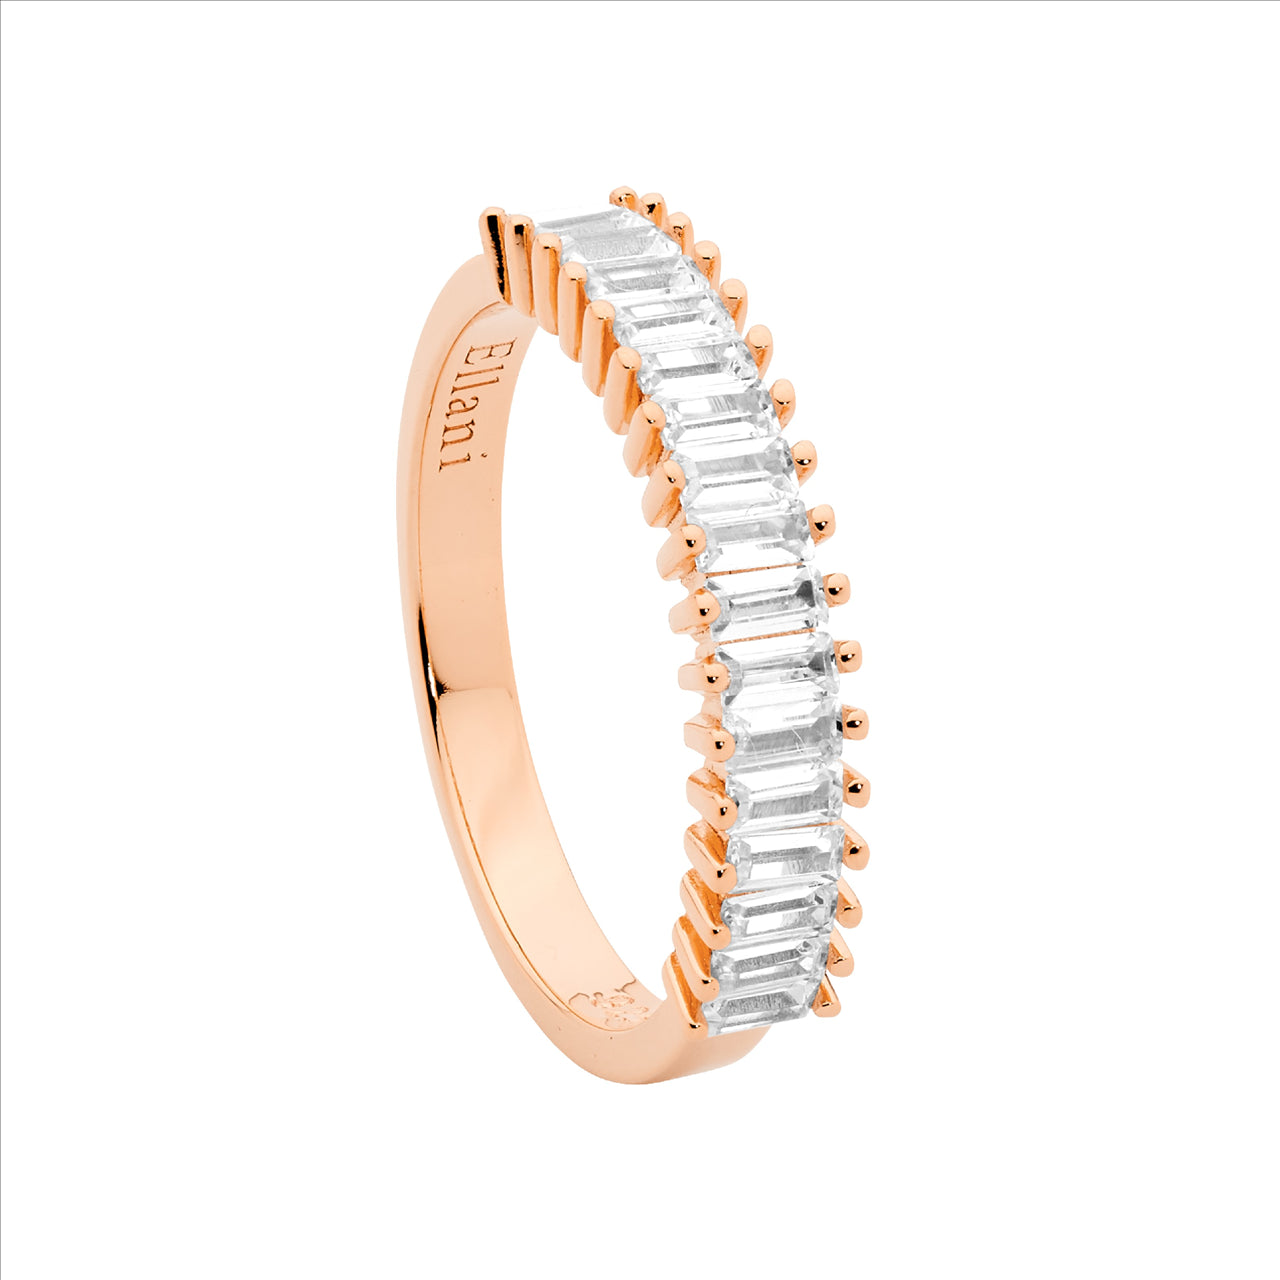 SS wh cz claw set baguette ring w/ rose gold plating